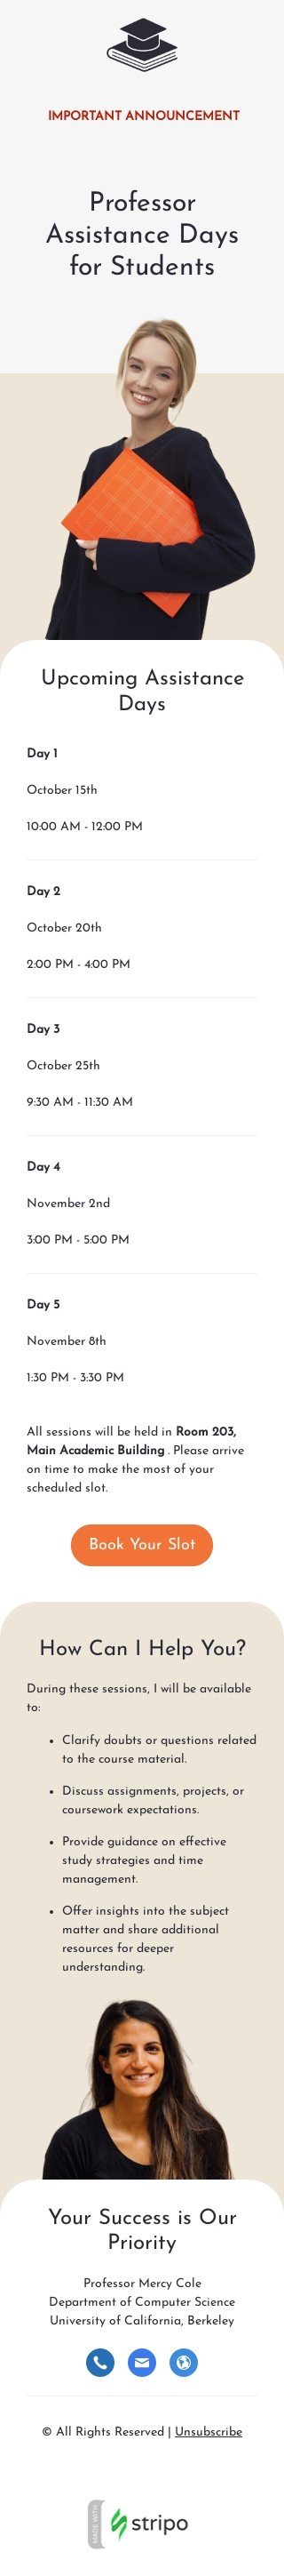 Confirmation email template "Assistance days" for professor email industry mobile view